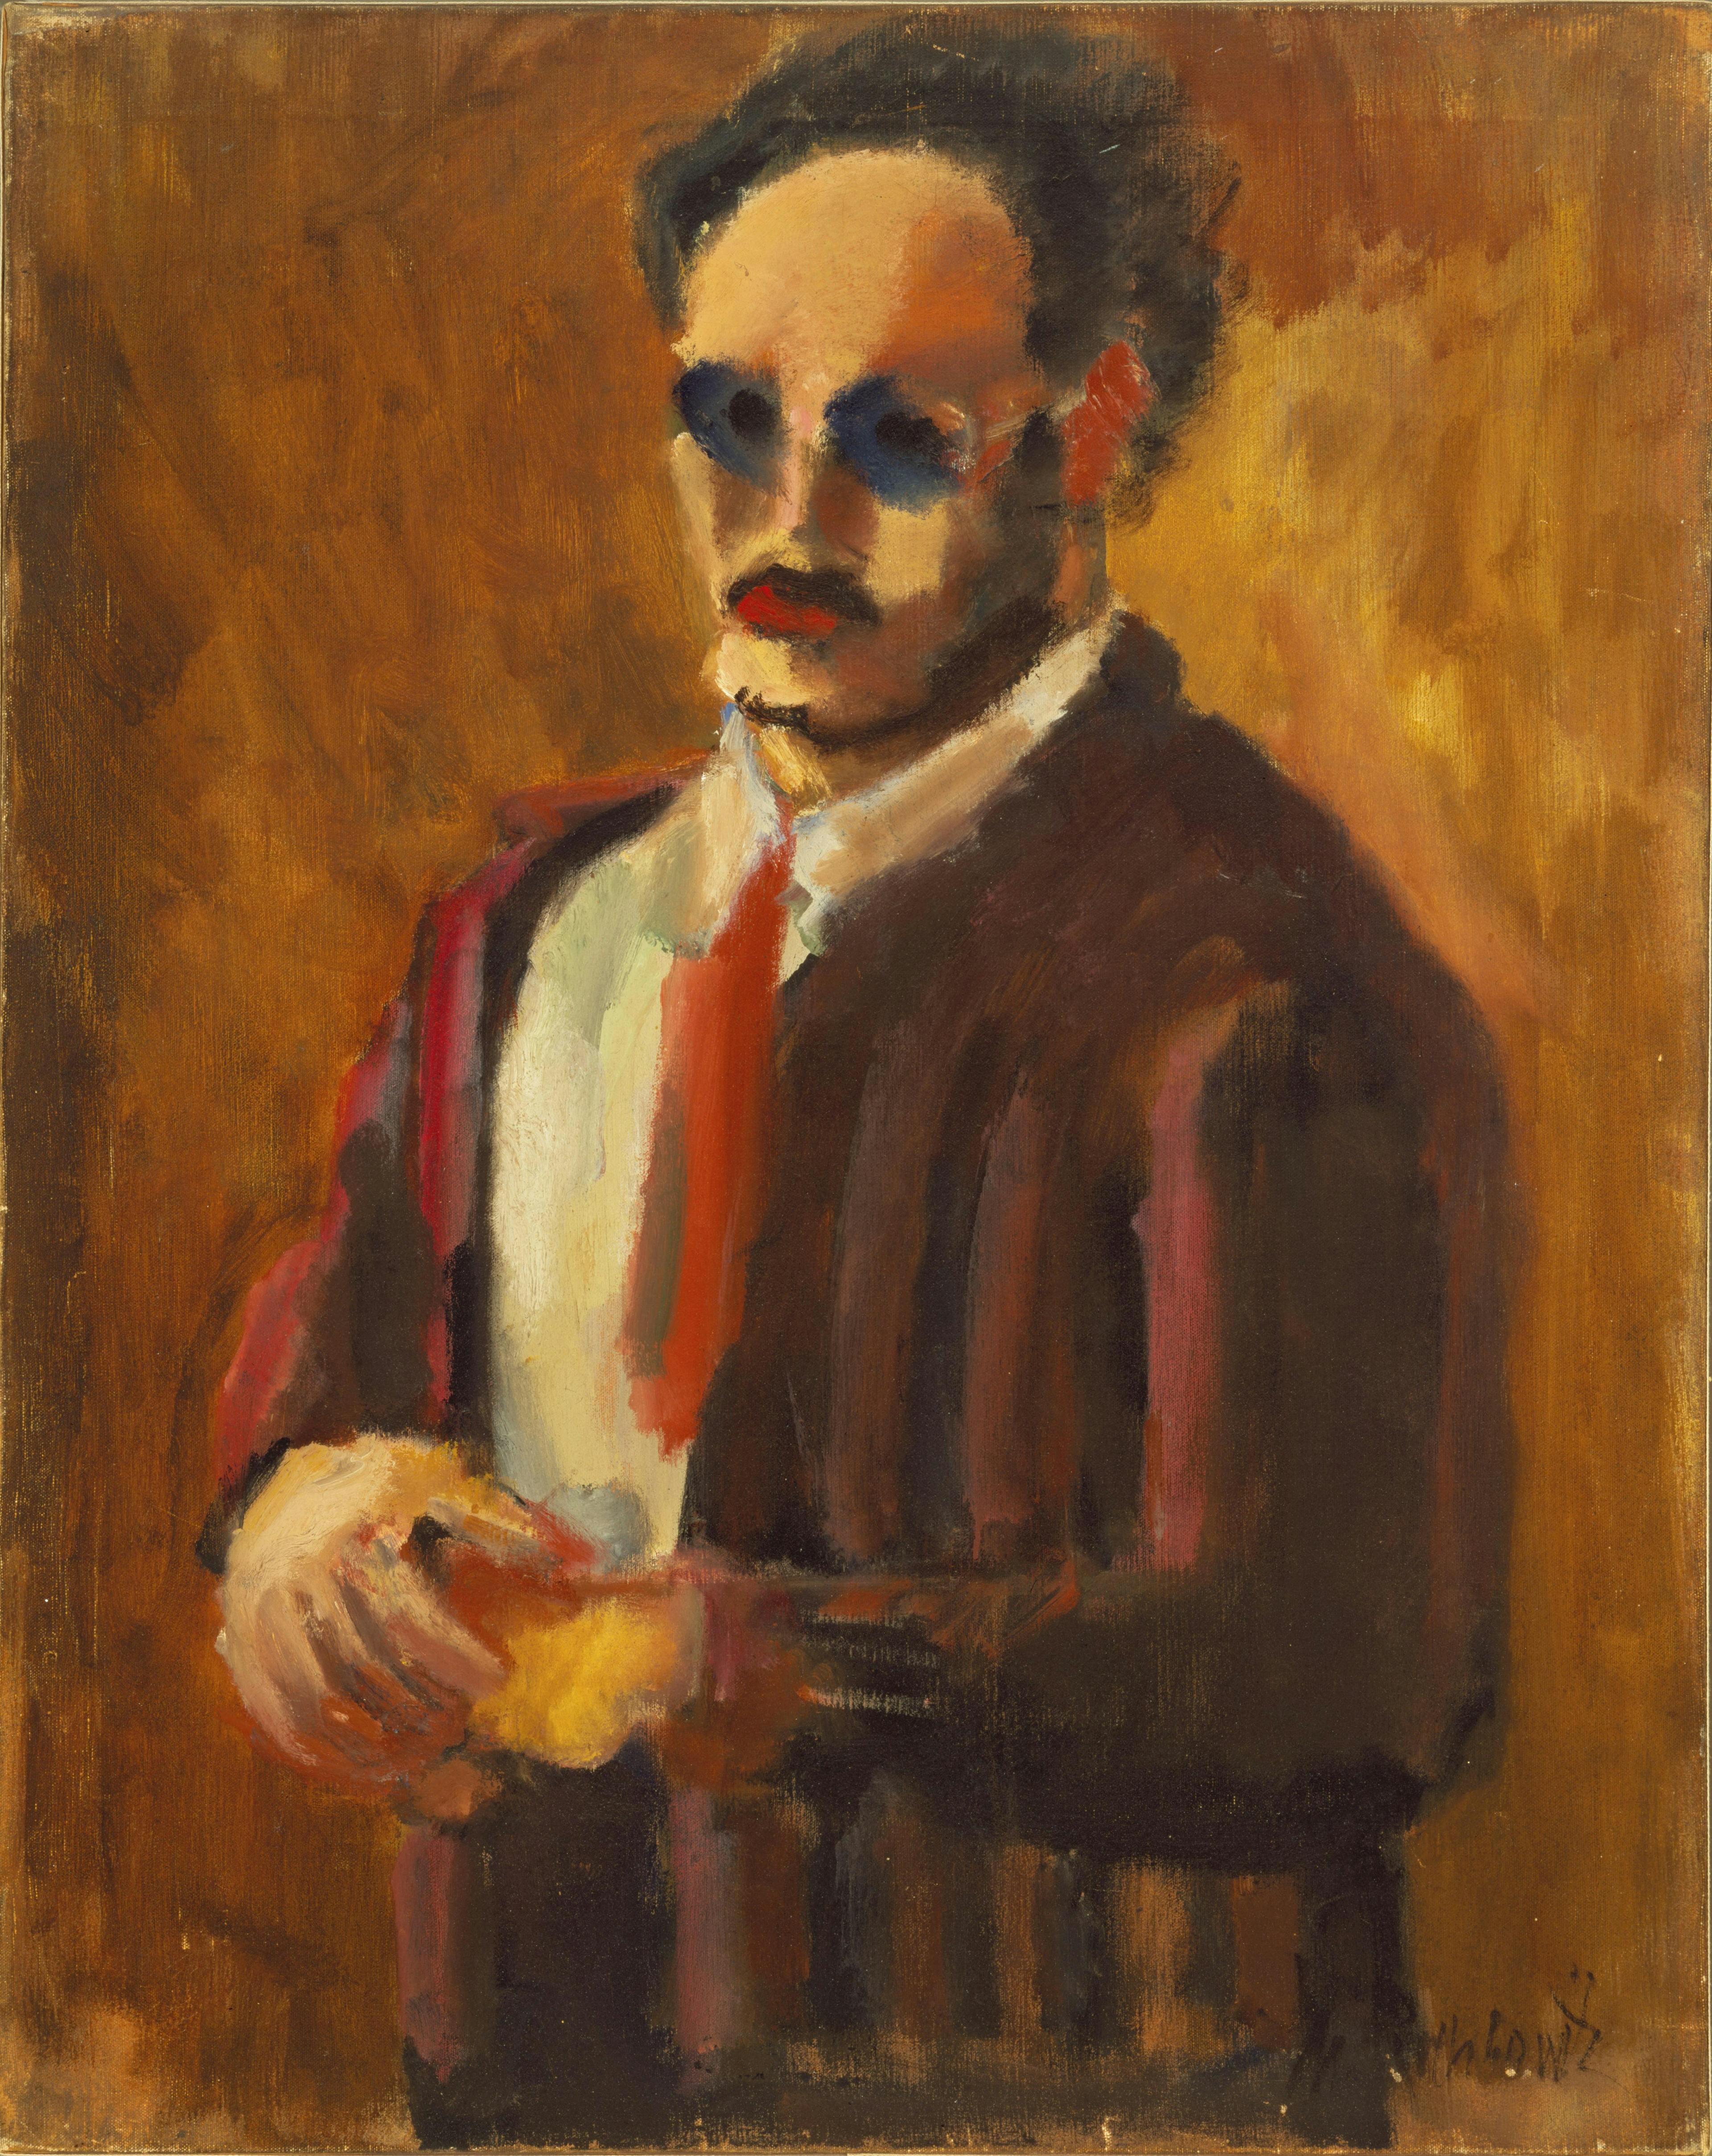 mark rothko (exposition flv), photographie d'oeuvre art painting adult male man person face head photography portrait